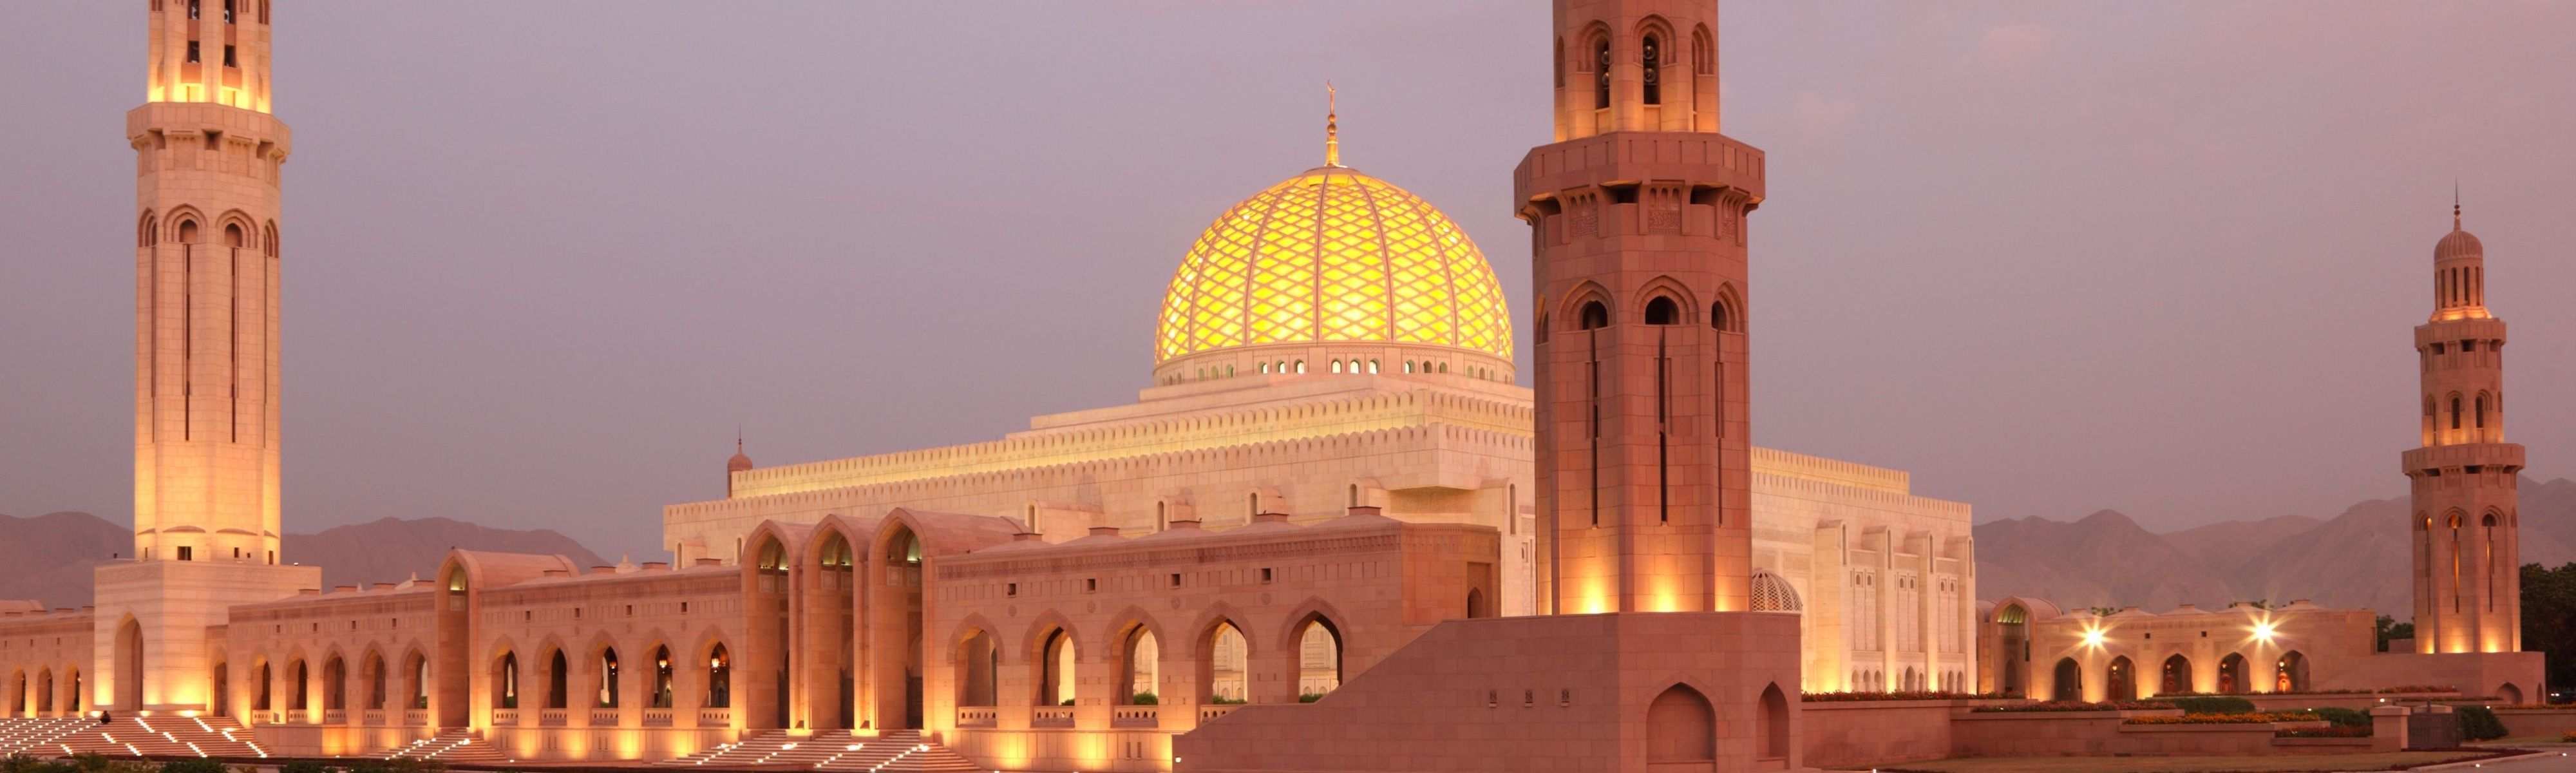 grand mosque in muscat oman at dusk